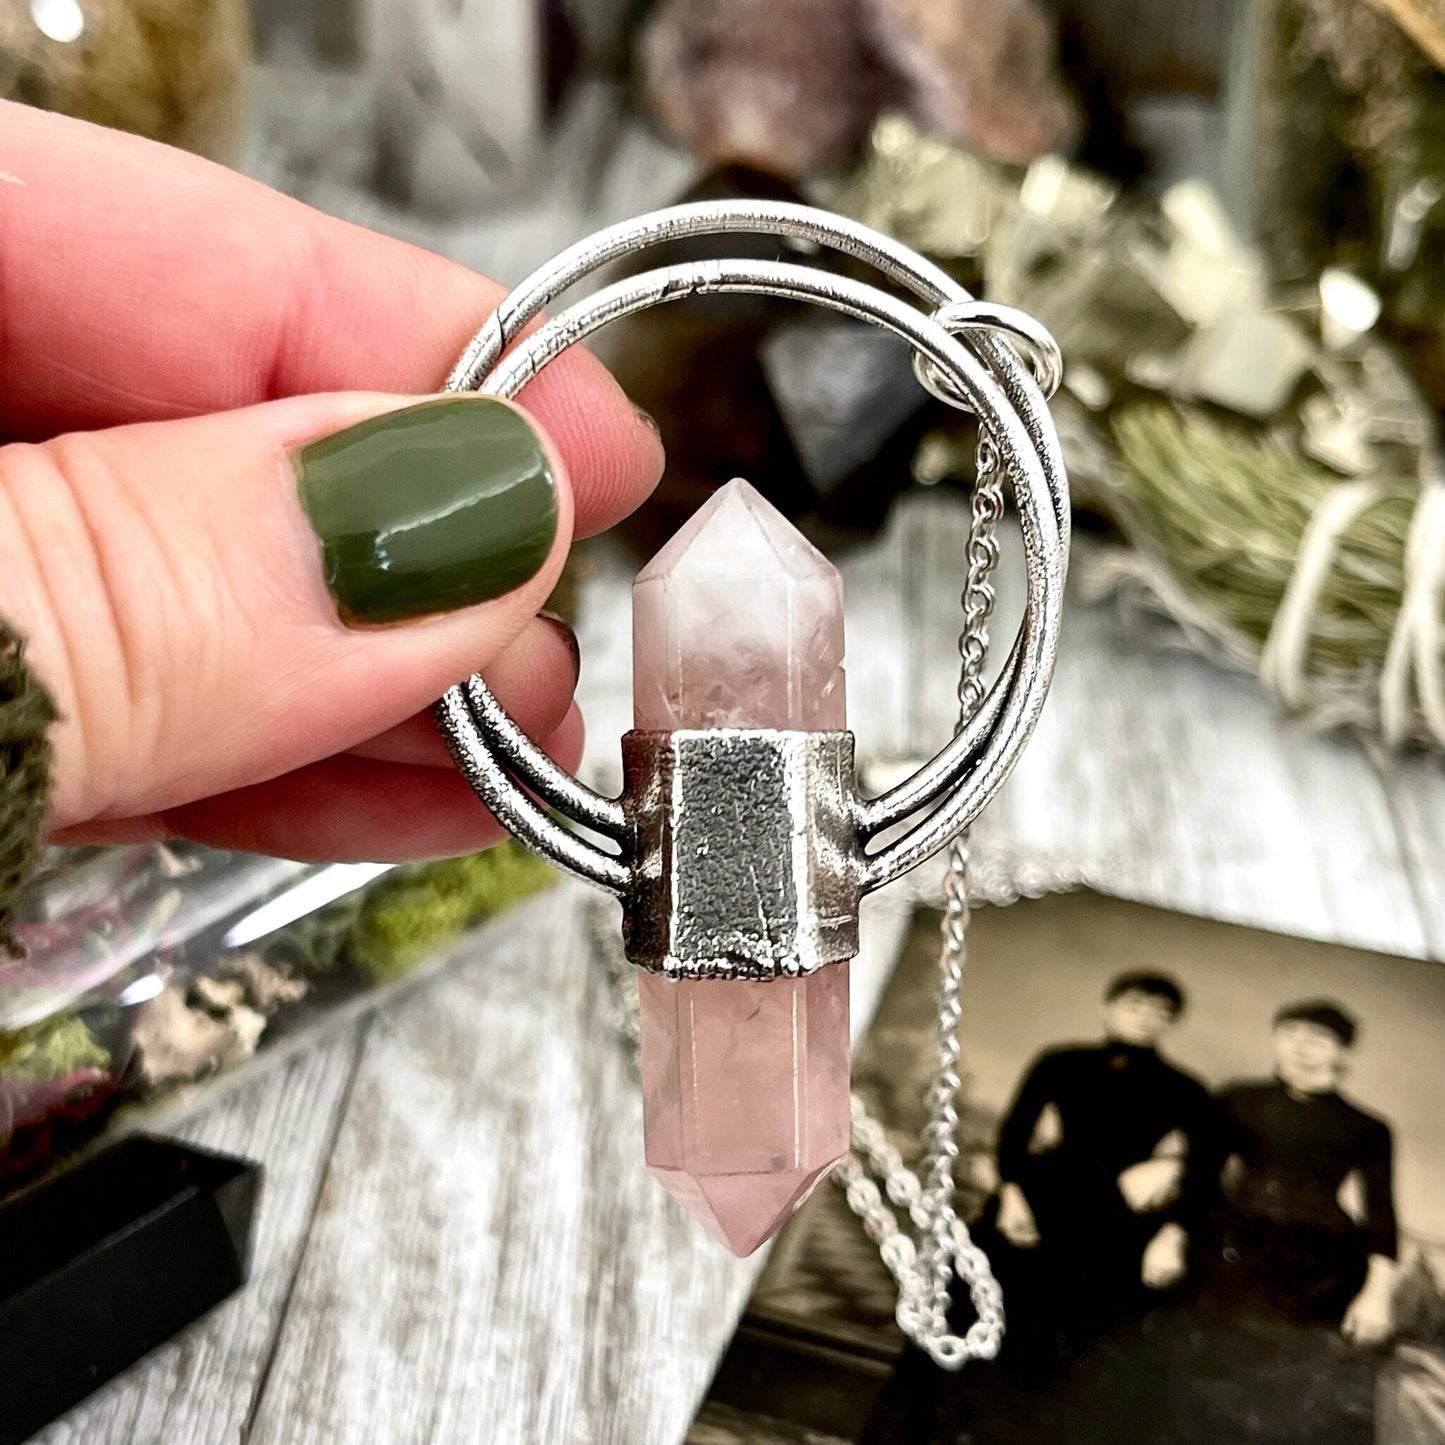 Rose Quartz Crystal Necklace in Silver / Foxlark Collection - One of a Kind - Foxlark Crystal Jewelry